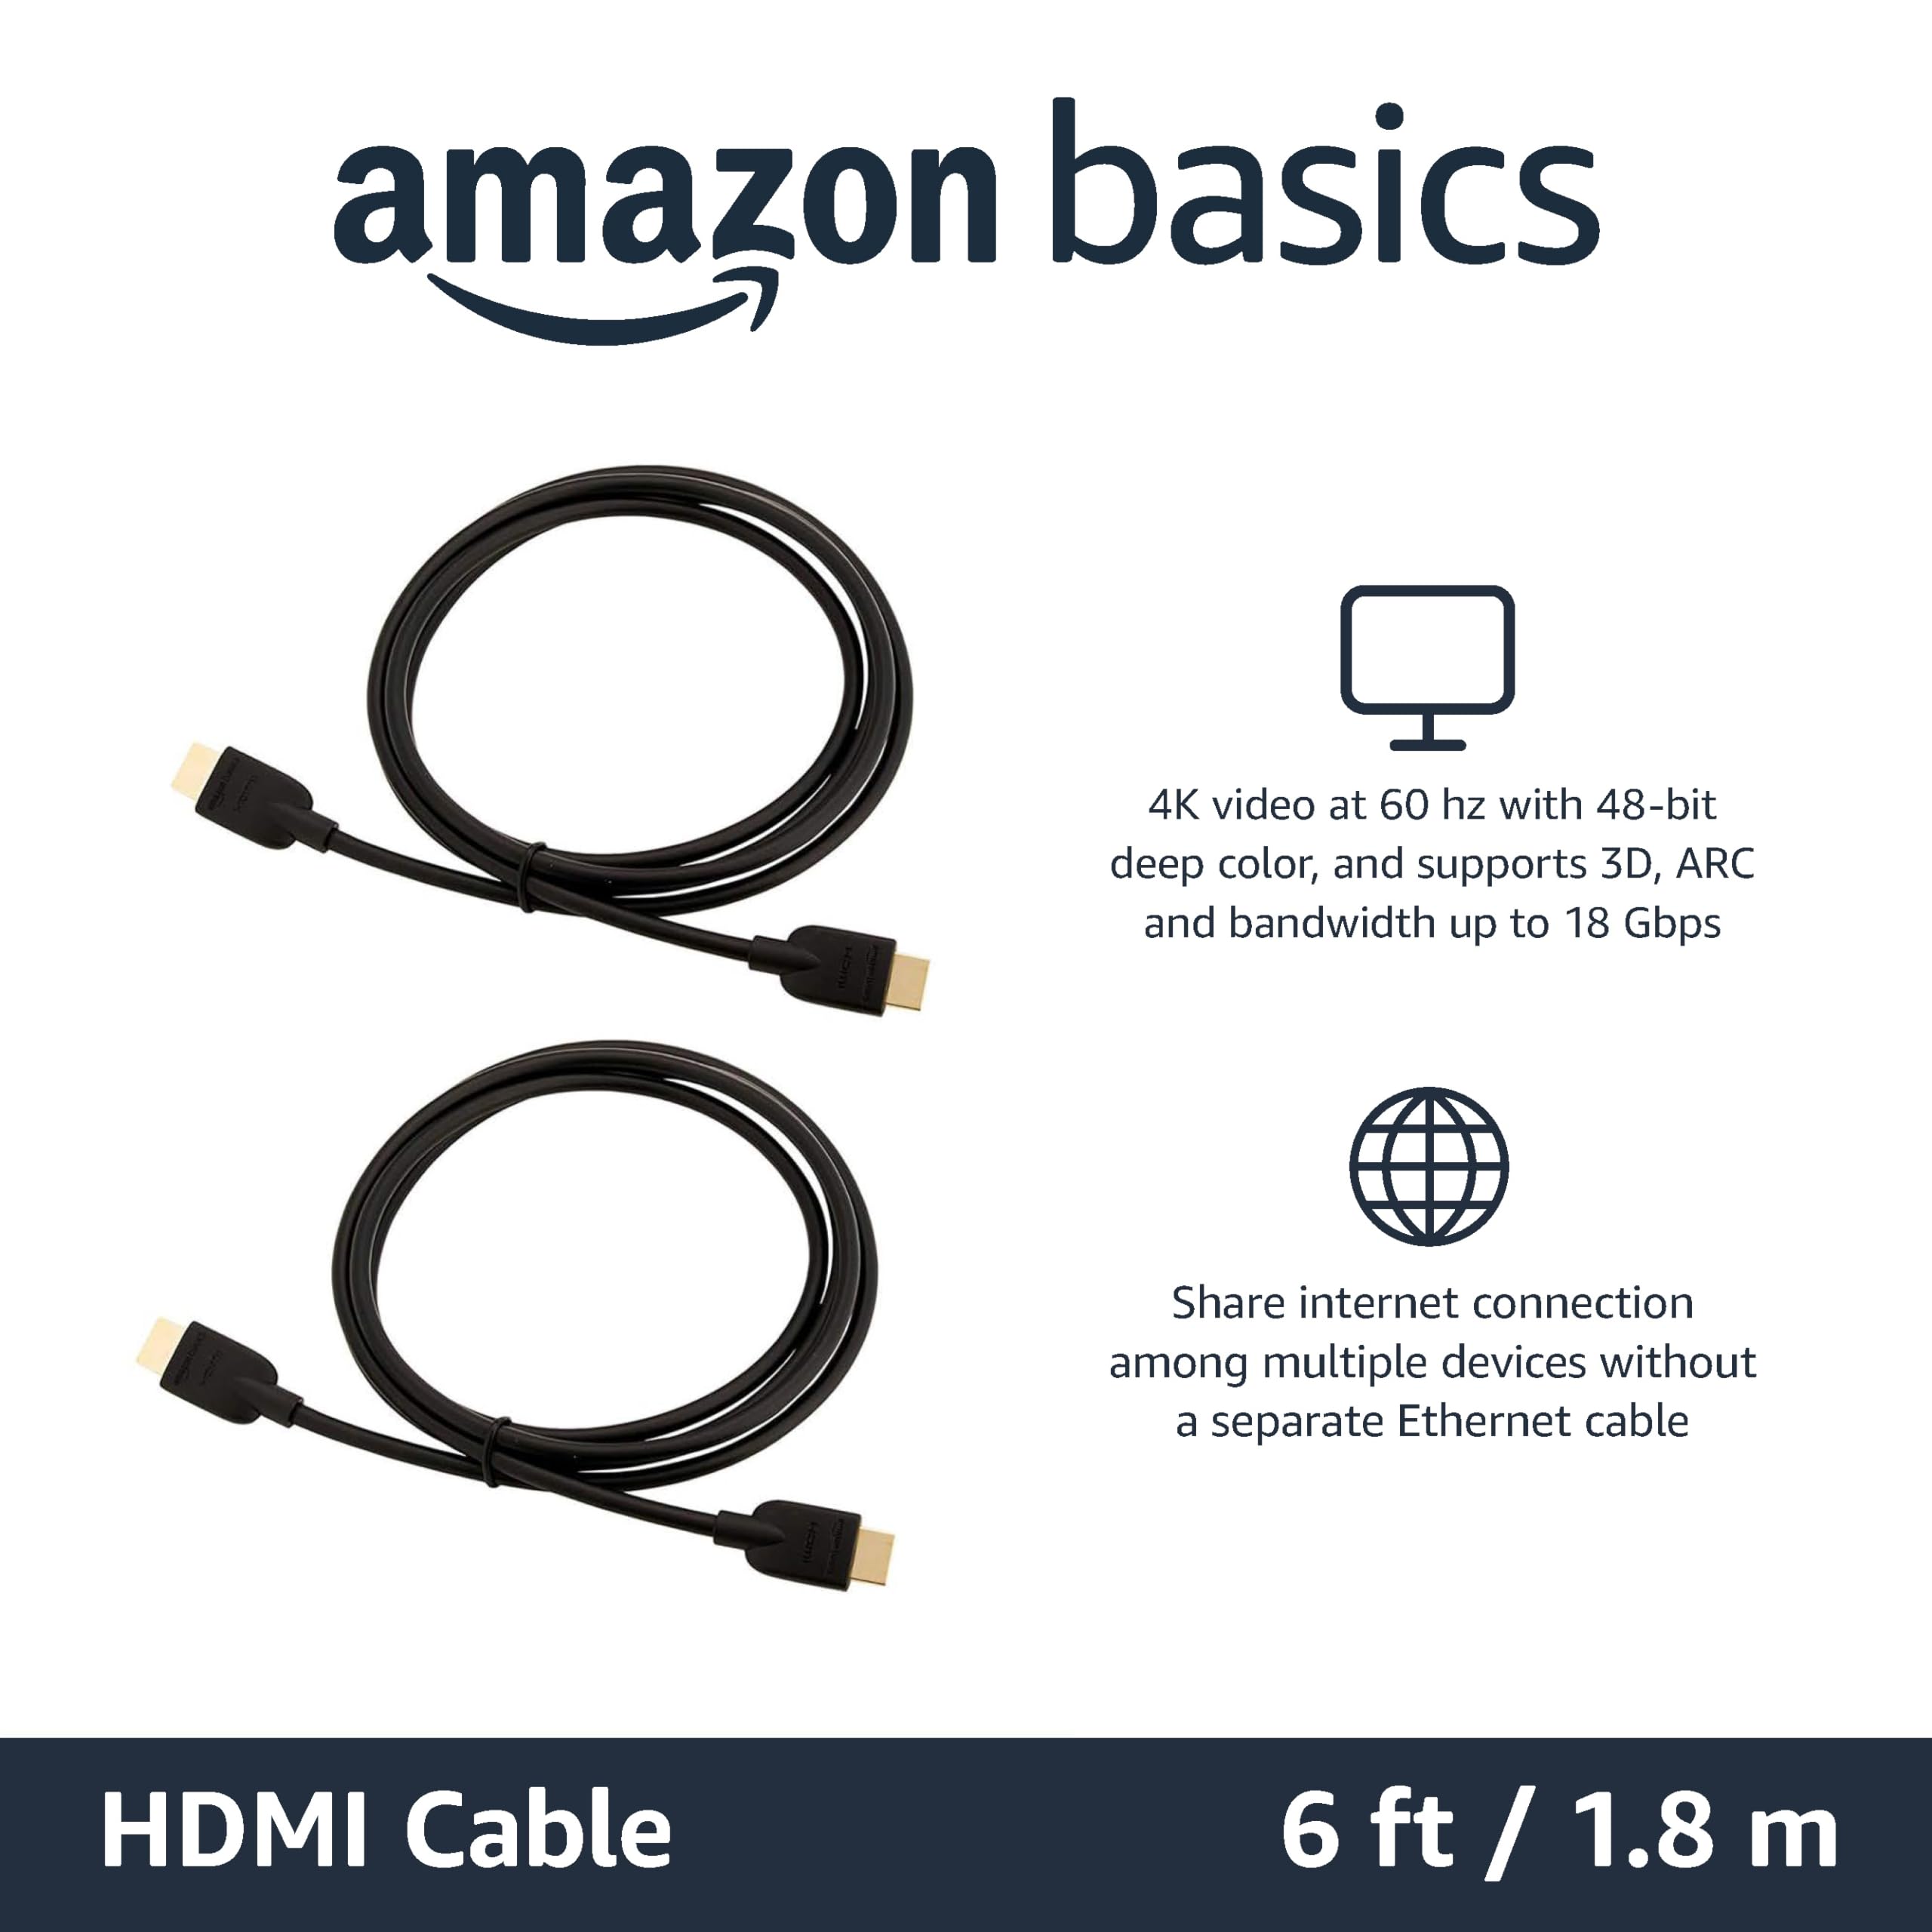 An image of a person connecting an HDMI cable to a device.